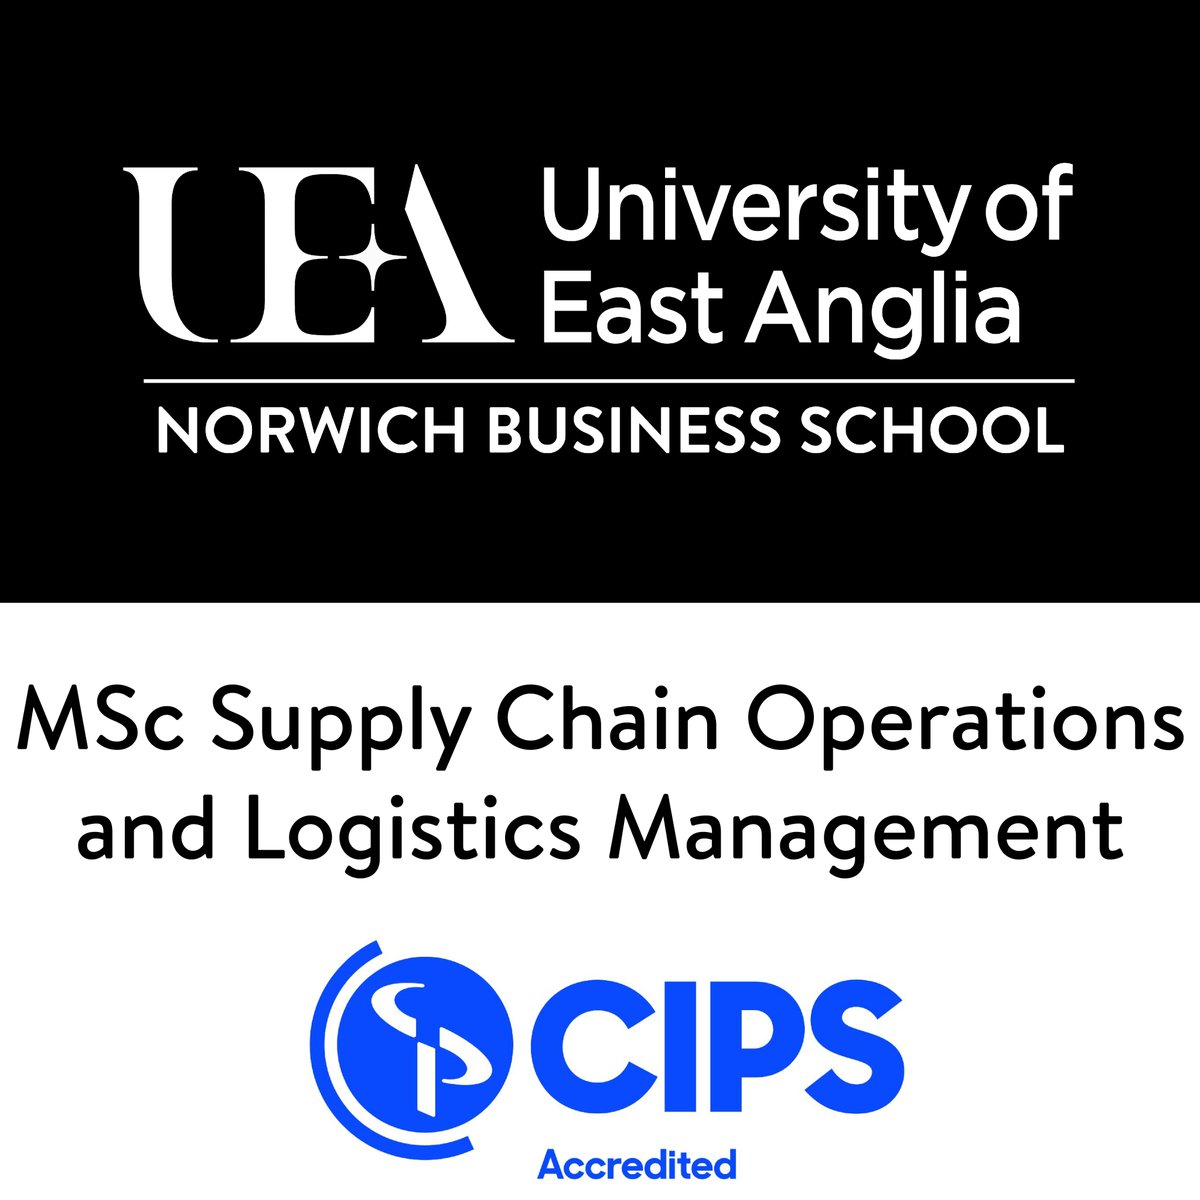 We’ve just been notified that the MSc Supply Chain Operations and Logistics Management has been reaccredited by CIPS (Chartered Institute of Procurement and Supply) for a further 5 years! Congratulations to all in the team involved.